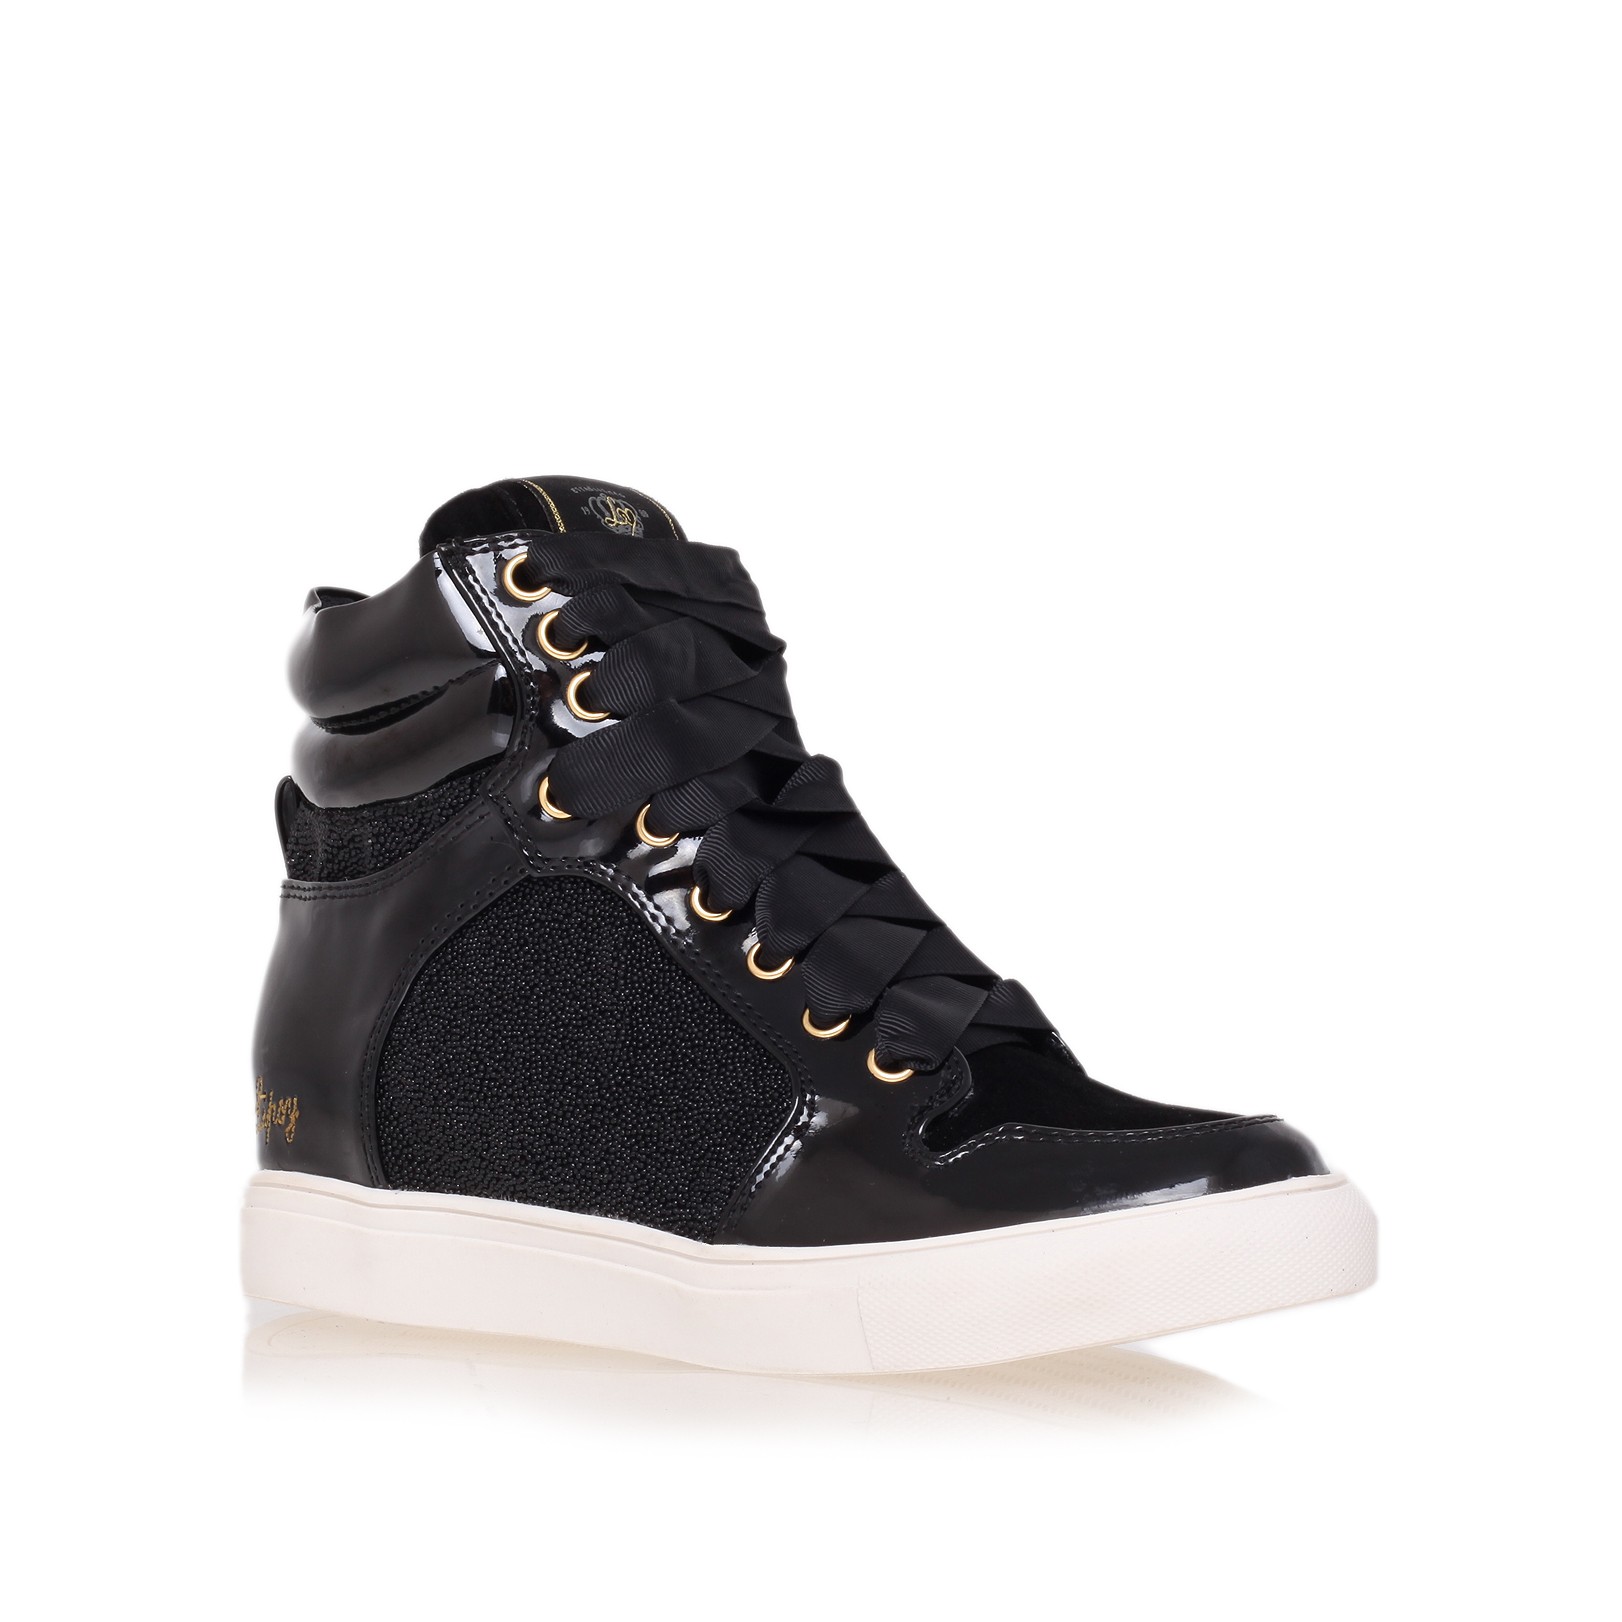 Lipsy Paris Trainer Shoes in Black | Lyst